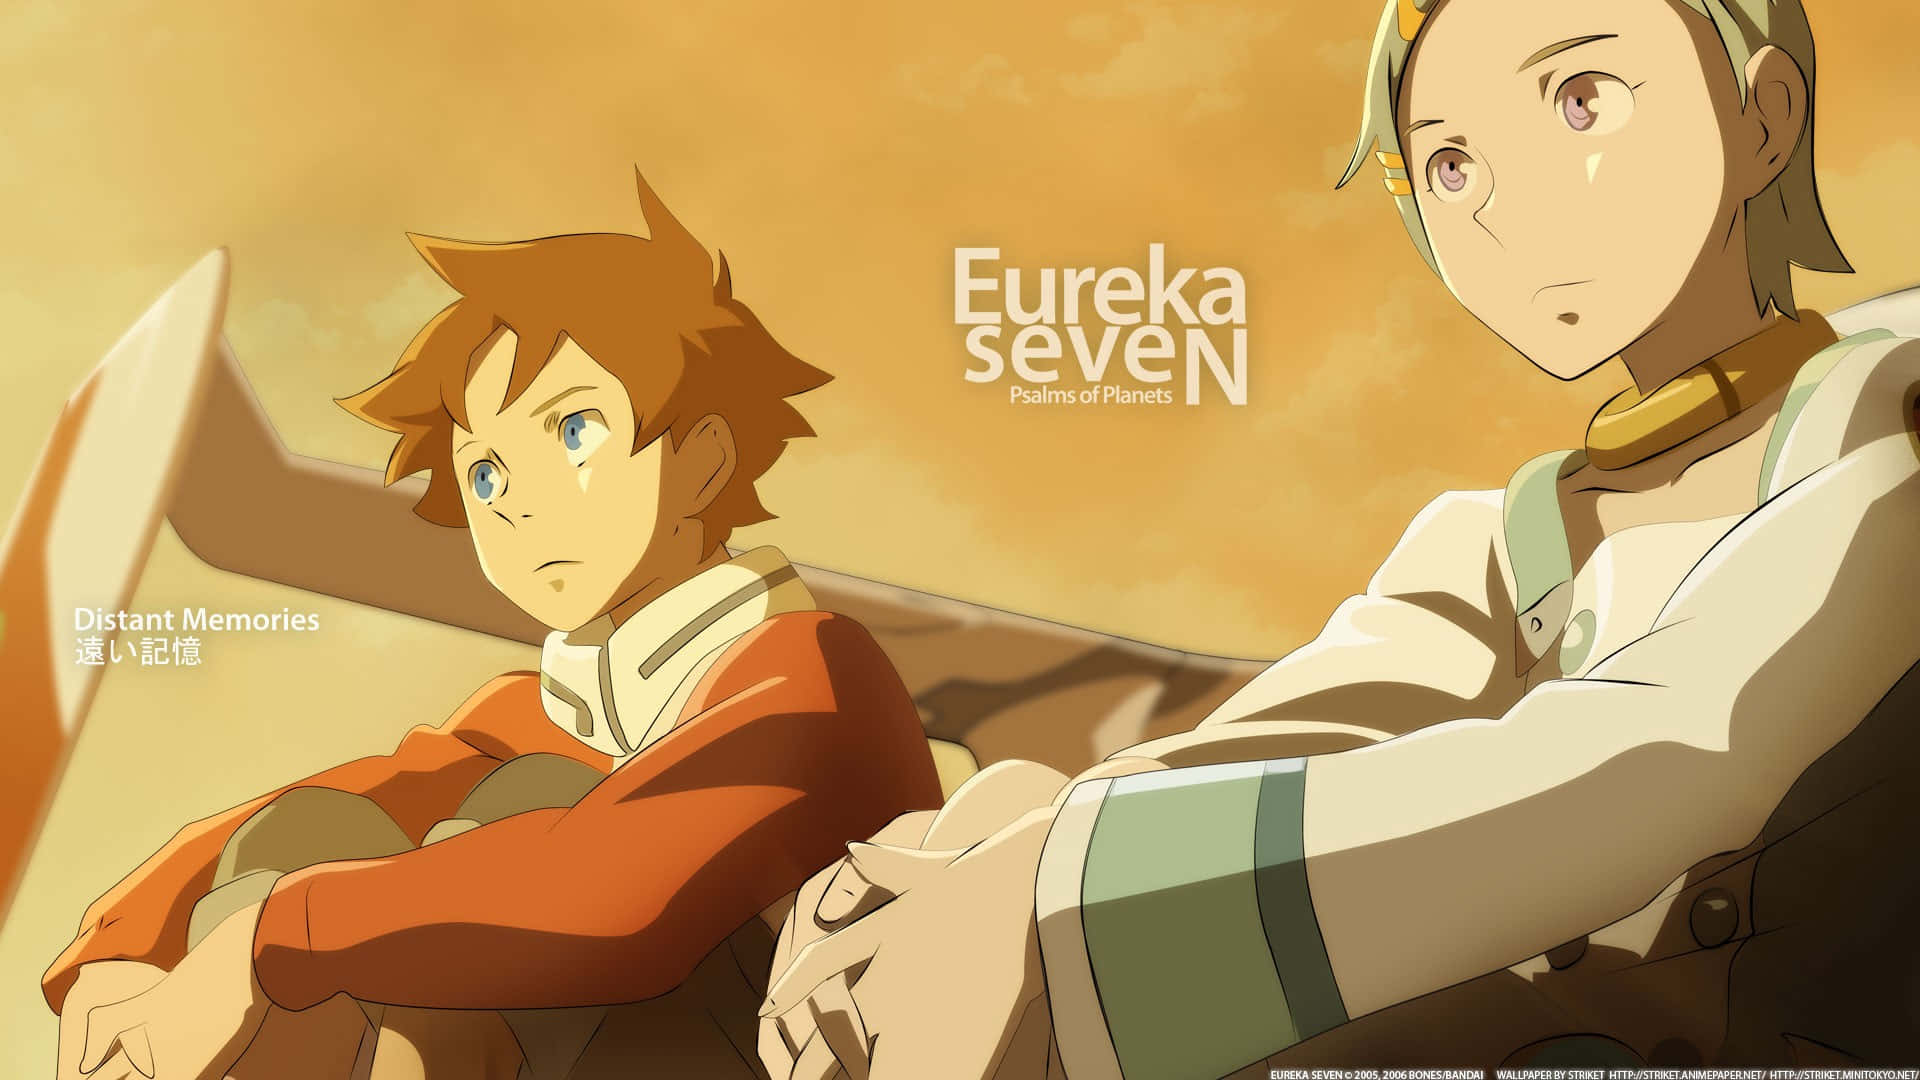 This is Eureka and Renton from the hit anime series Eureka Seven!